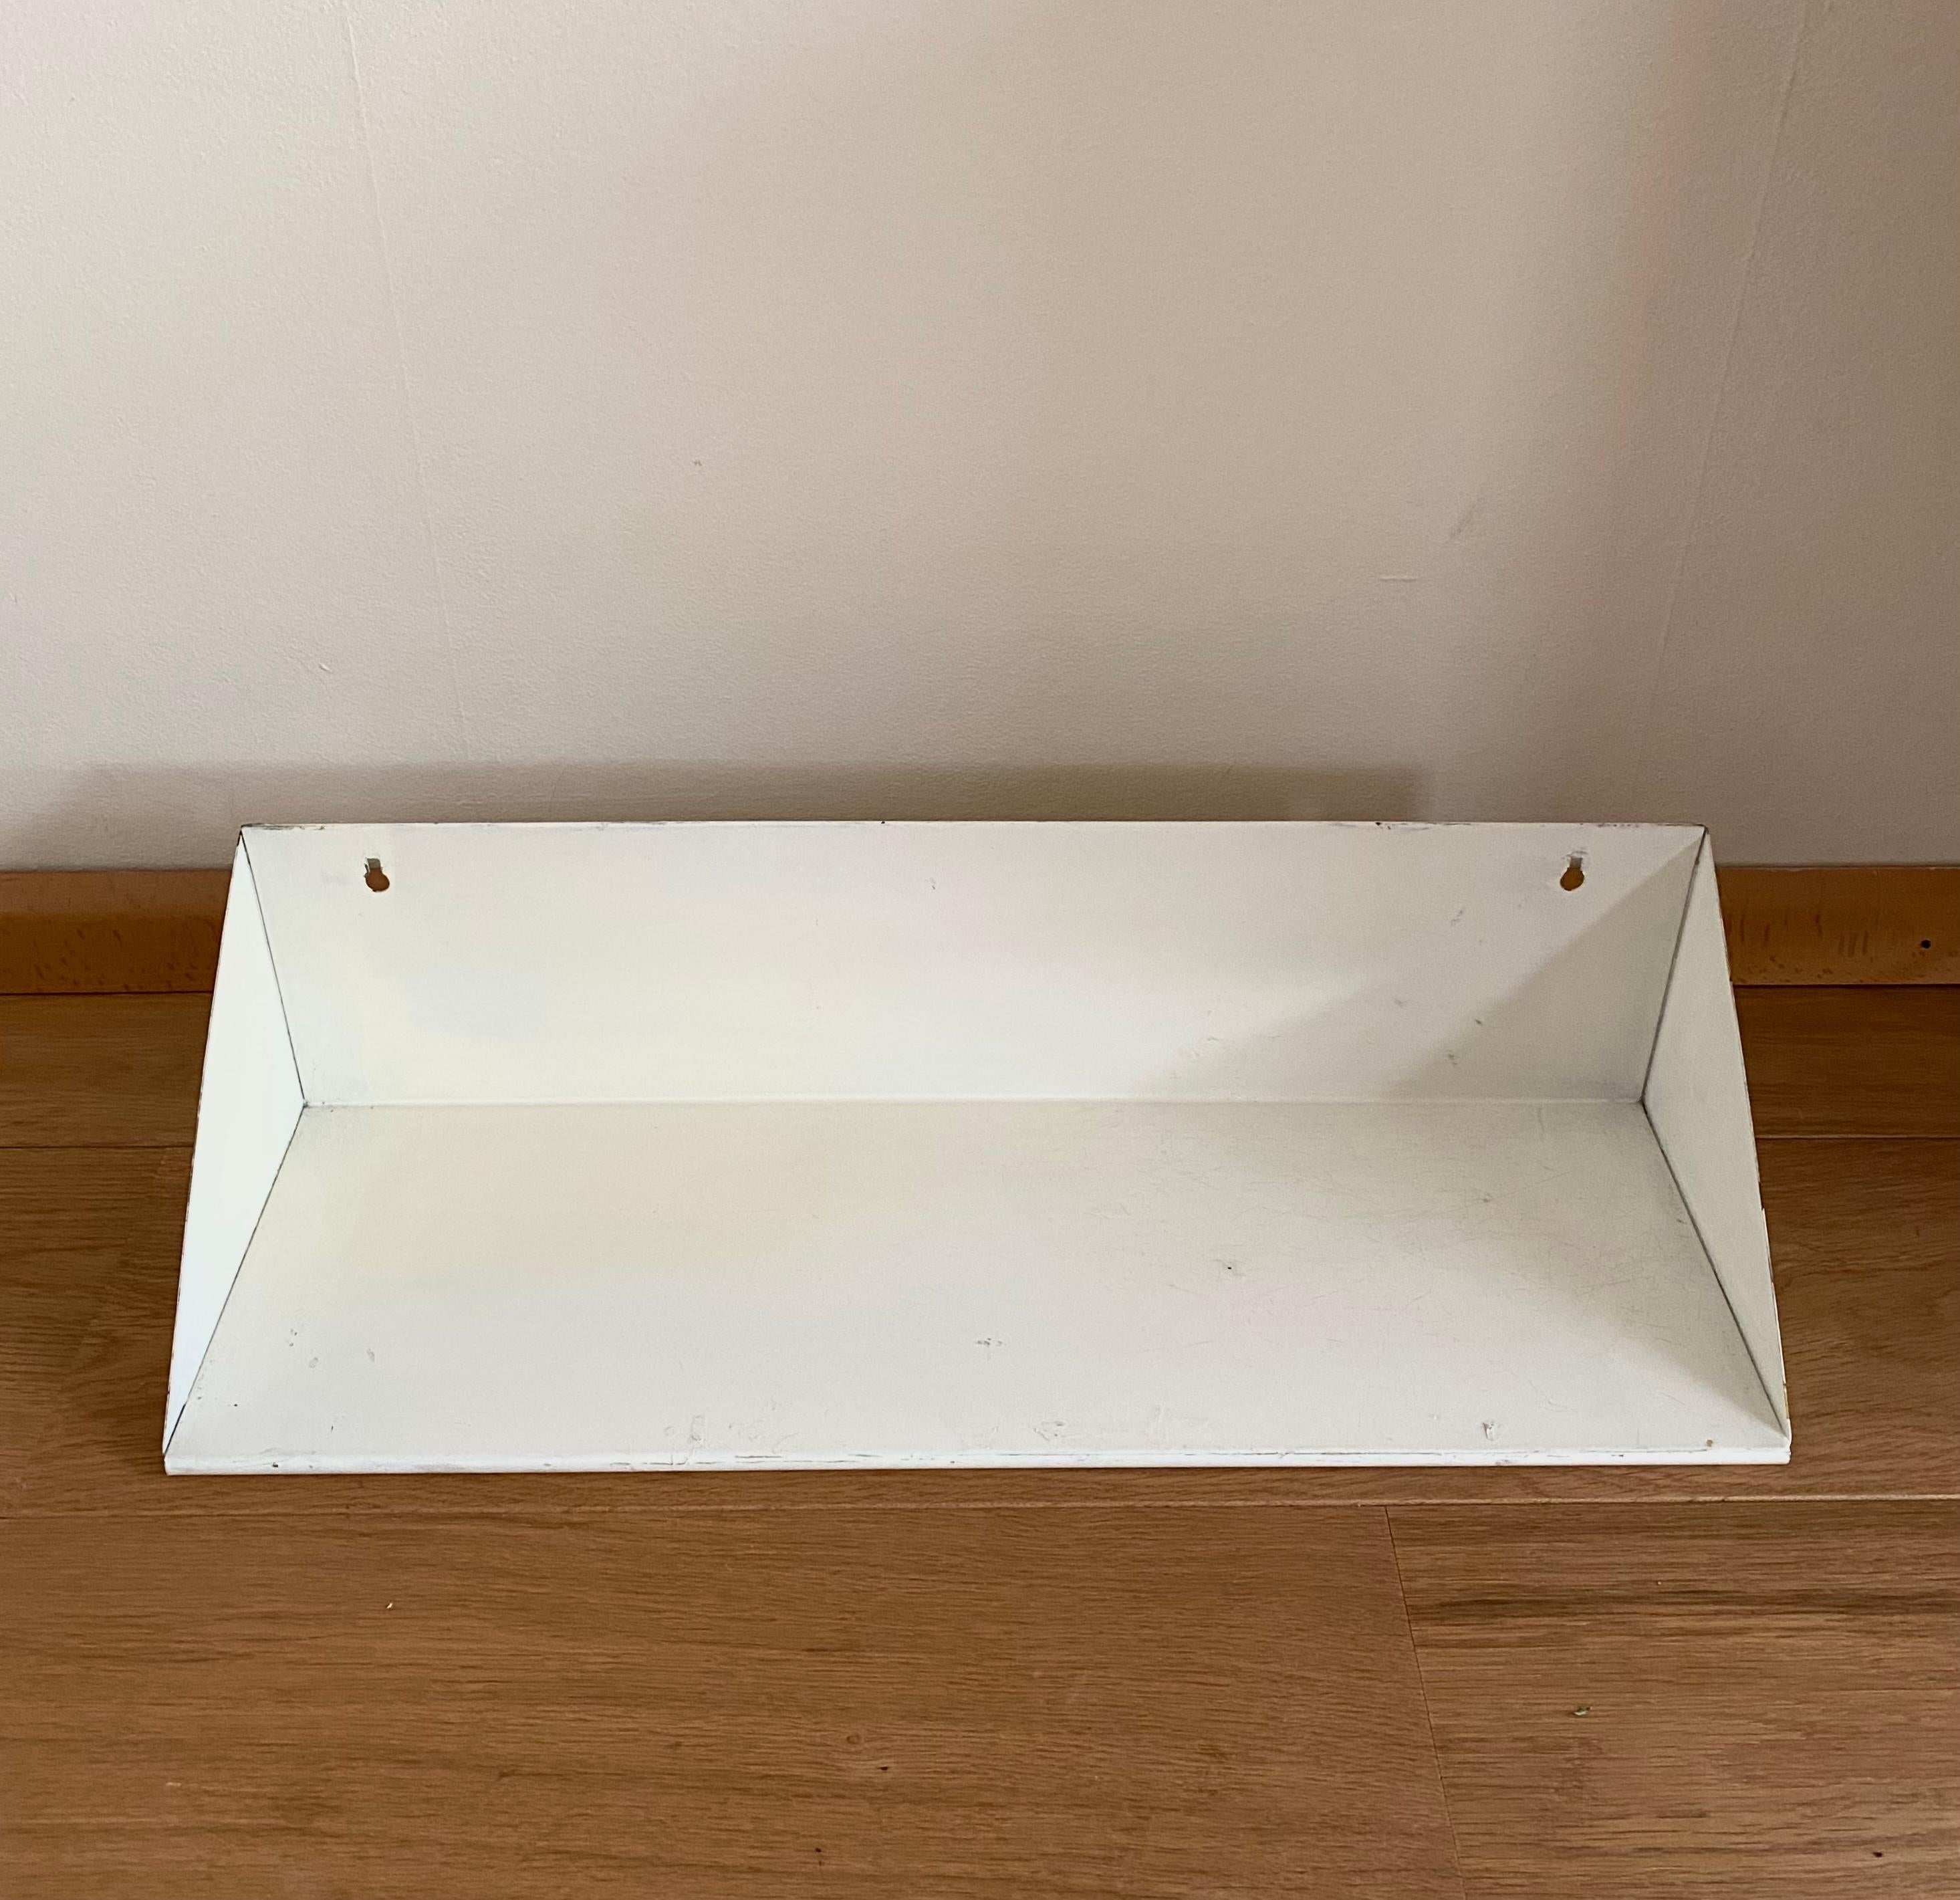 Very rare metal wall shelf designed by Dutch artist and designer Constant Nieuwenhuys for Asmeta (ASsendelftse METAalwarenfabriek).

The shelf remains in good condition with light wear, such as thin scratches, some discoloration (yellowed at the